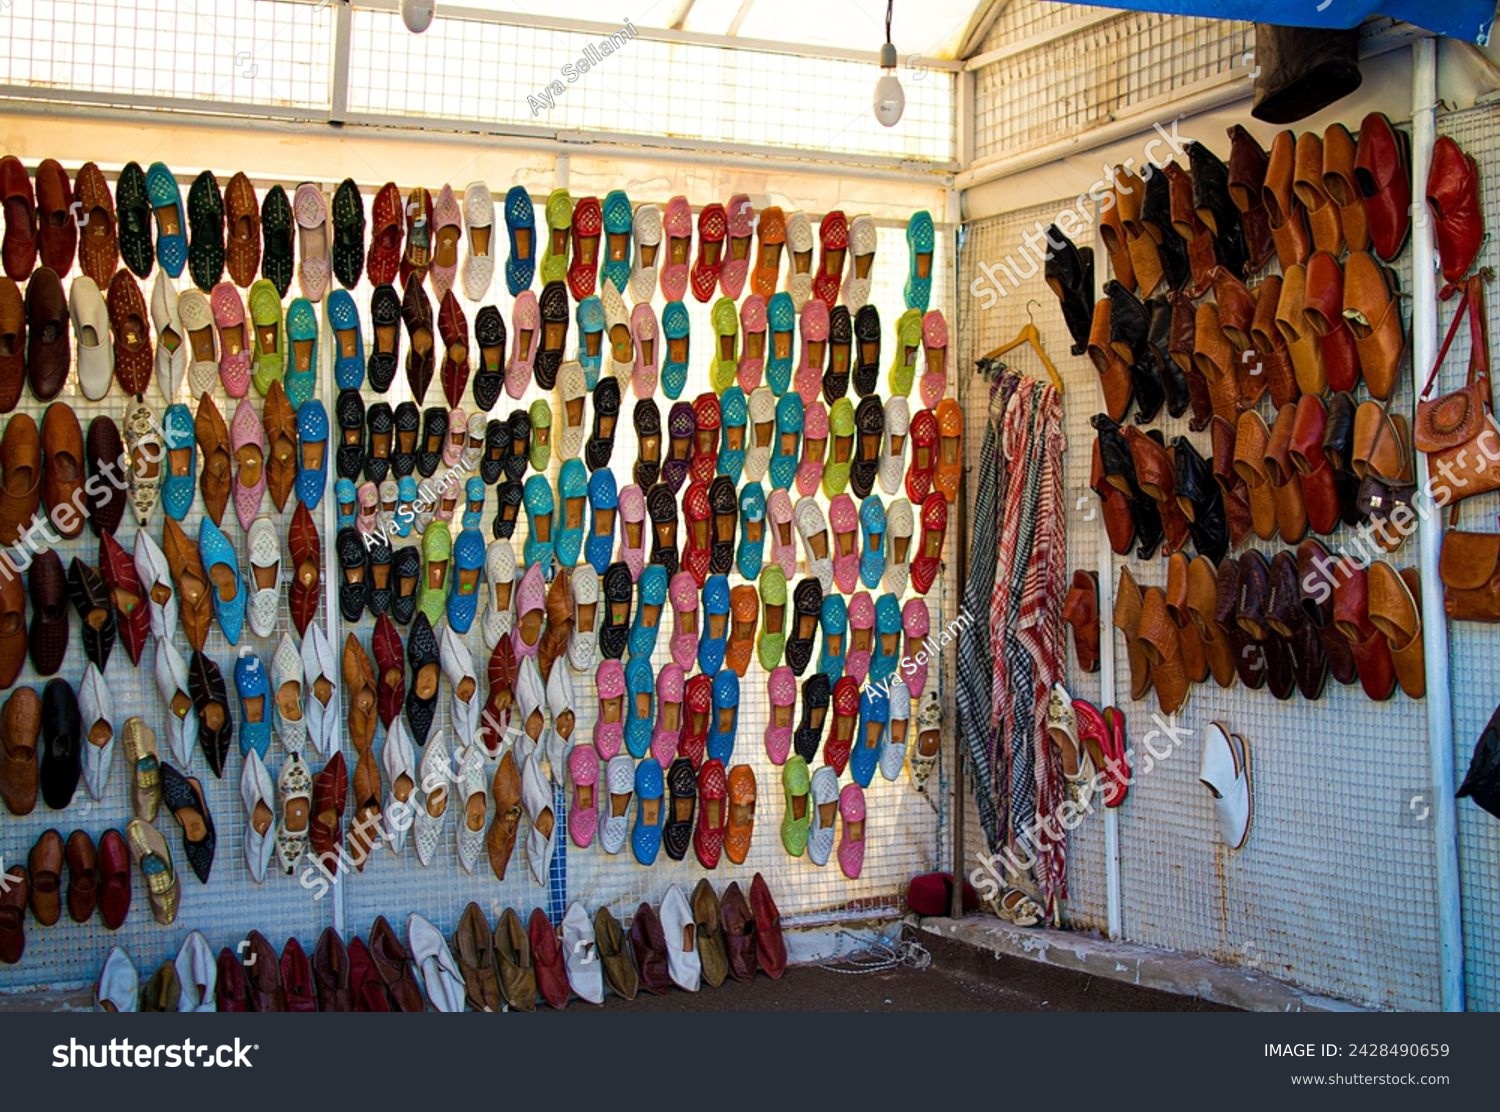 Handcrafted traditional shoes sold in a souvenir shop in the village of Sidi Bou Said, Tunisia near the capital of Tunis (a UNESCO world heritage site) #2428490659